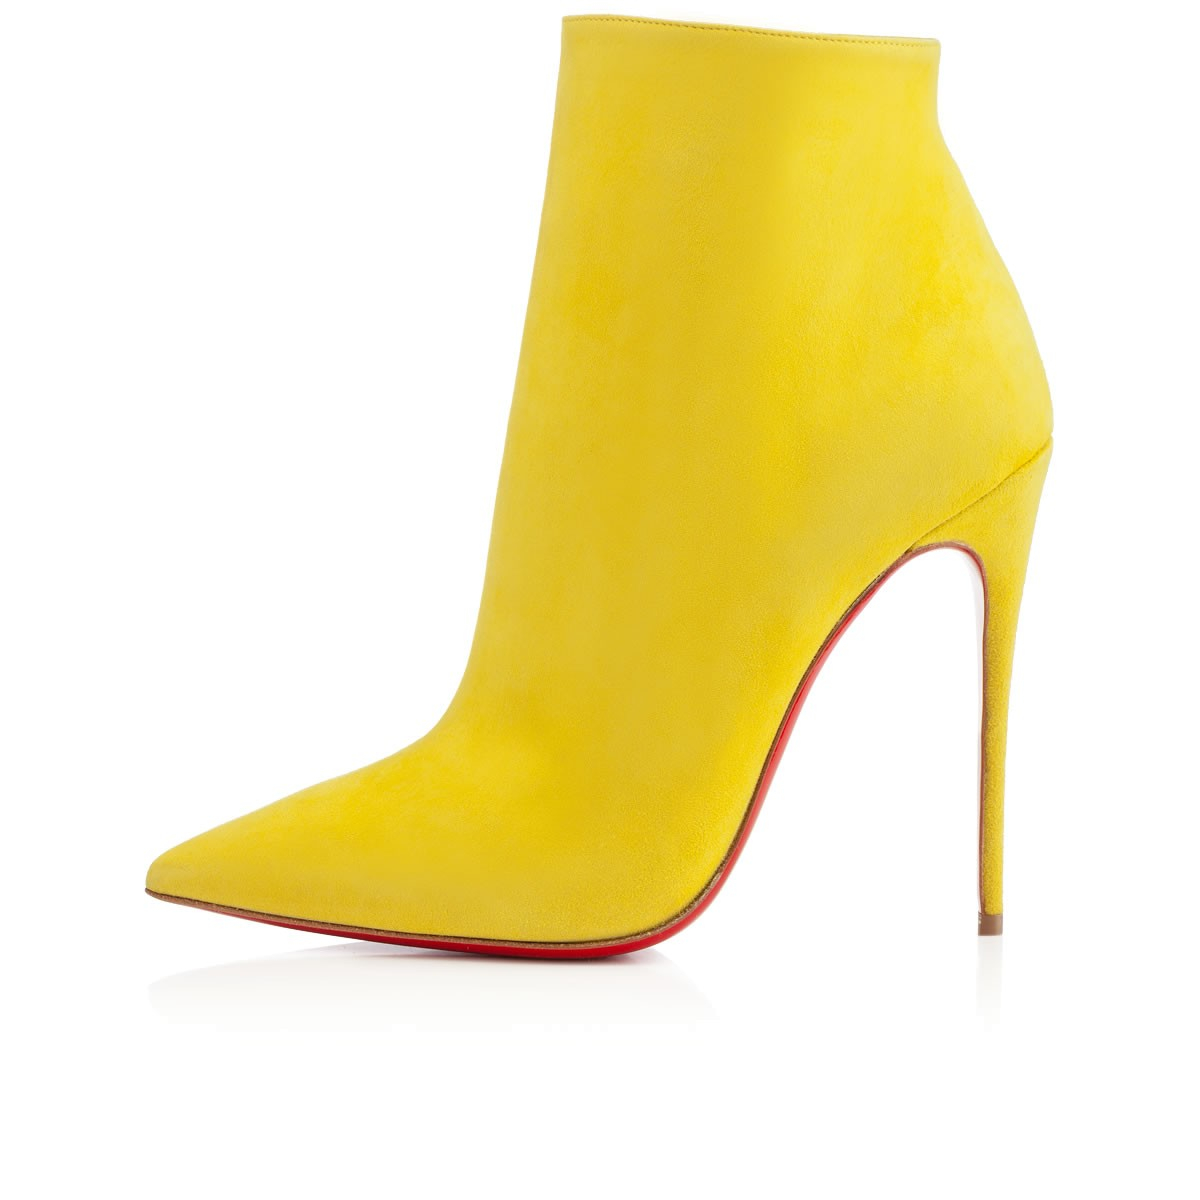 christian louboutin discount shoes - christian louboutin outlet coupon code